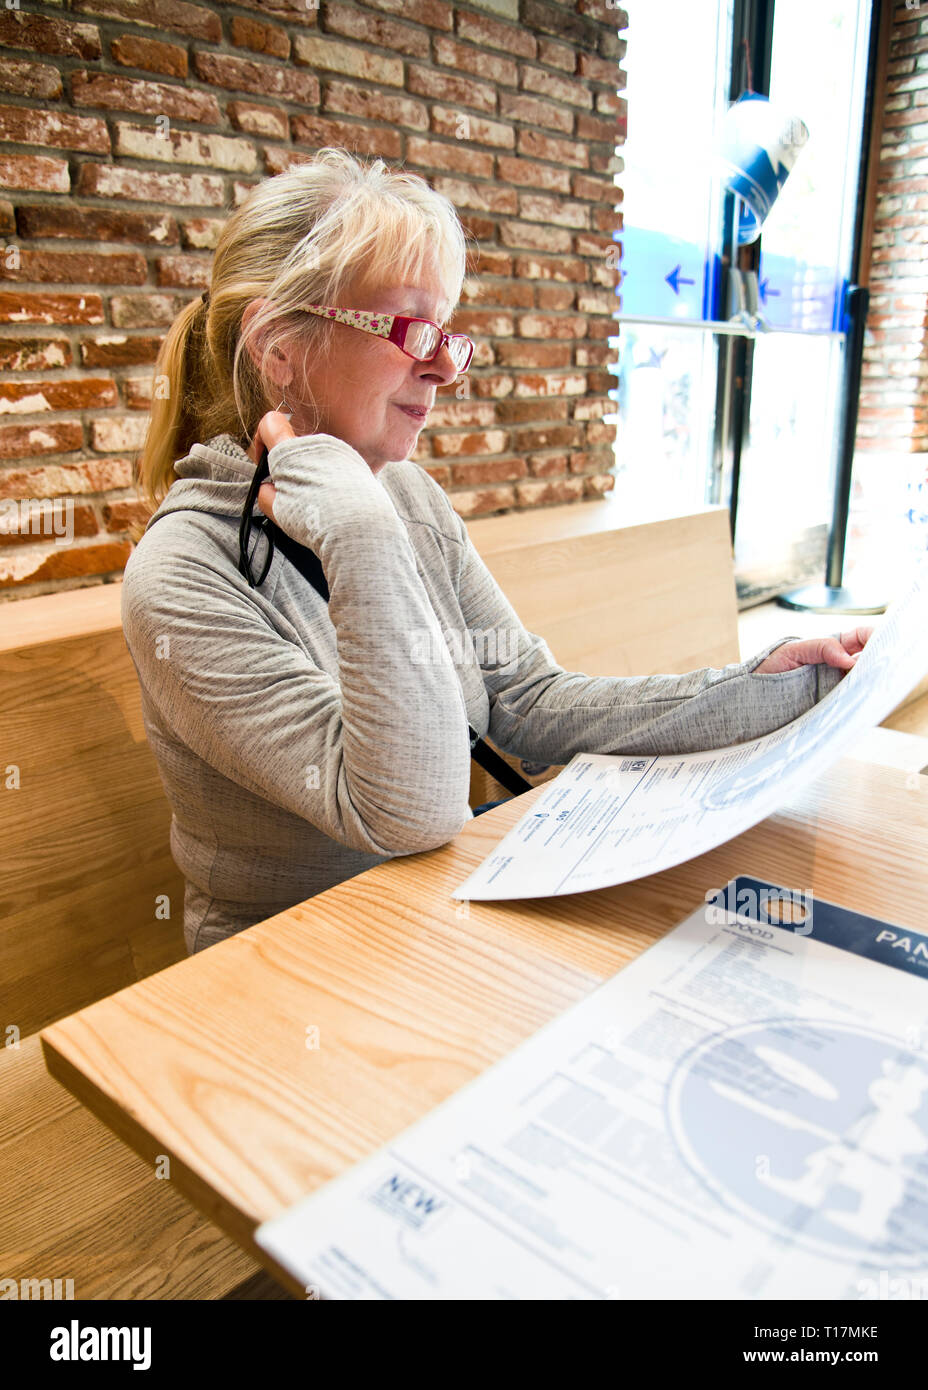 Middle aged woman sitting alone in casual dinning cafe, looking down at the menu in modern styled cafe with basic interior furnishings Stock Photo